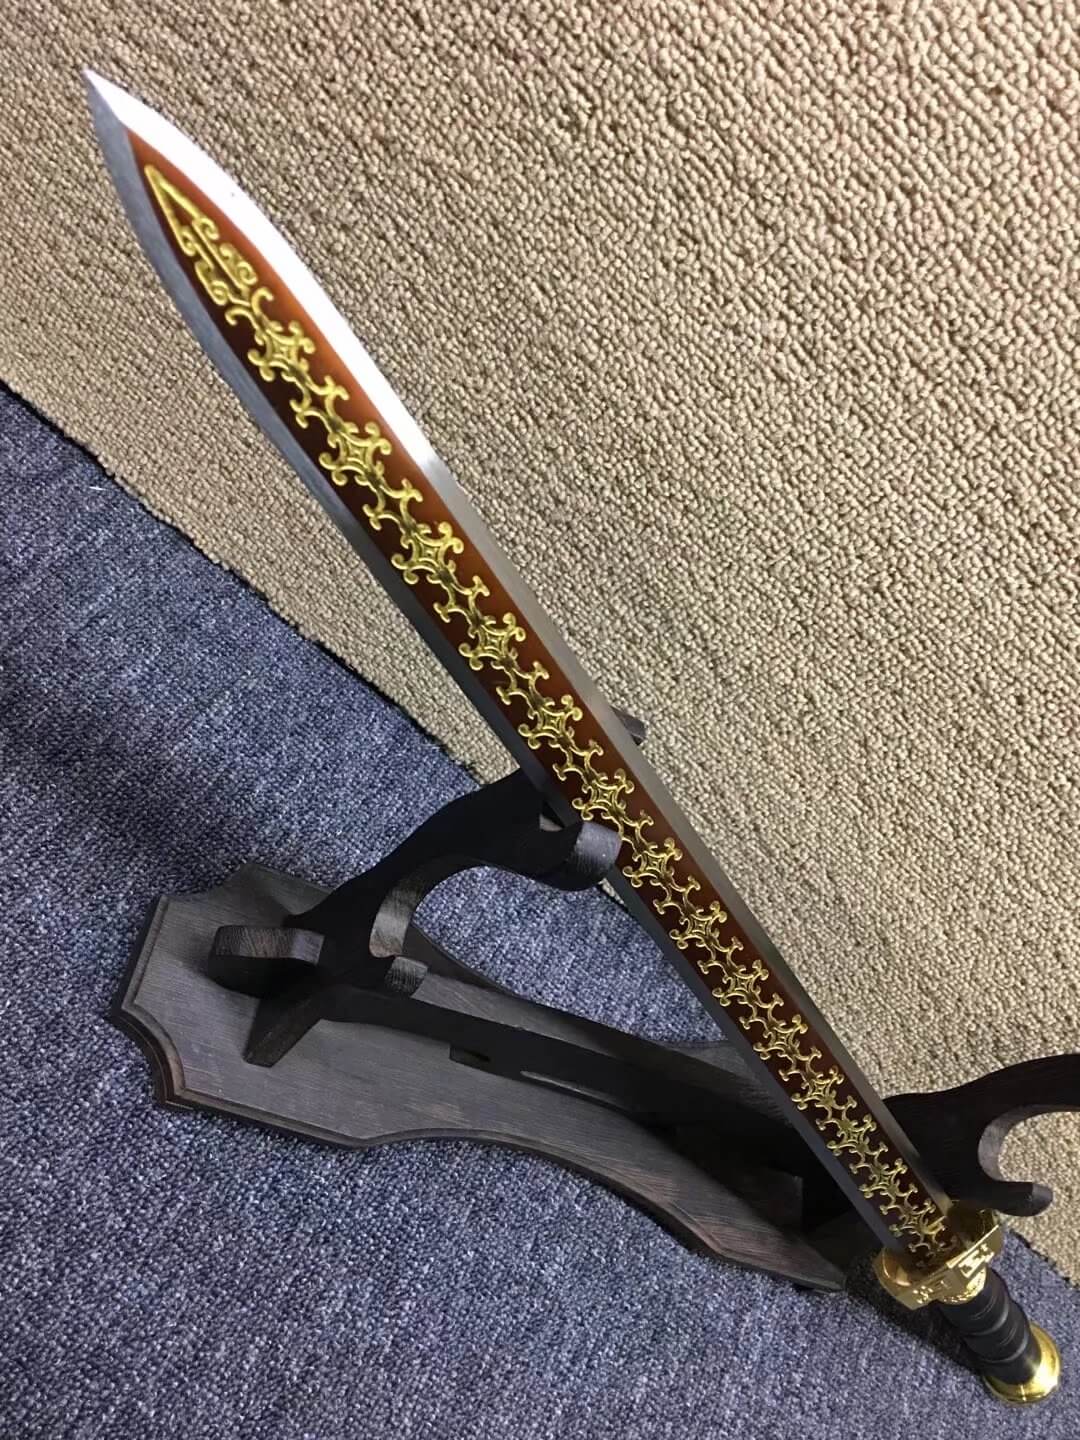 Qin jian,High manganese steel blade,Black scabbard,Alloy fittings,30inch - Chinese sword shop